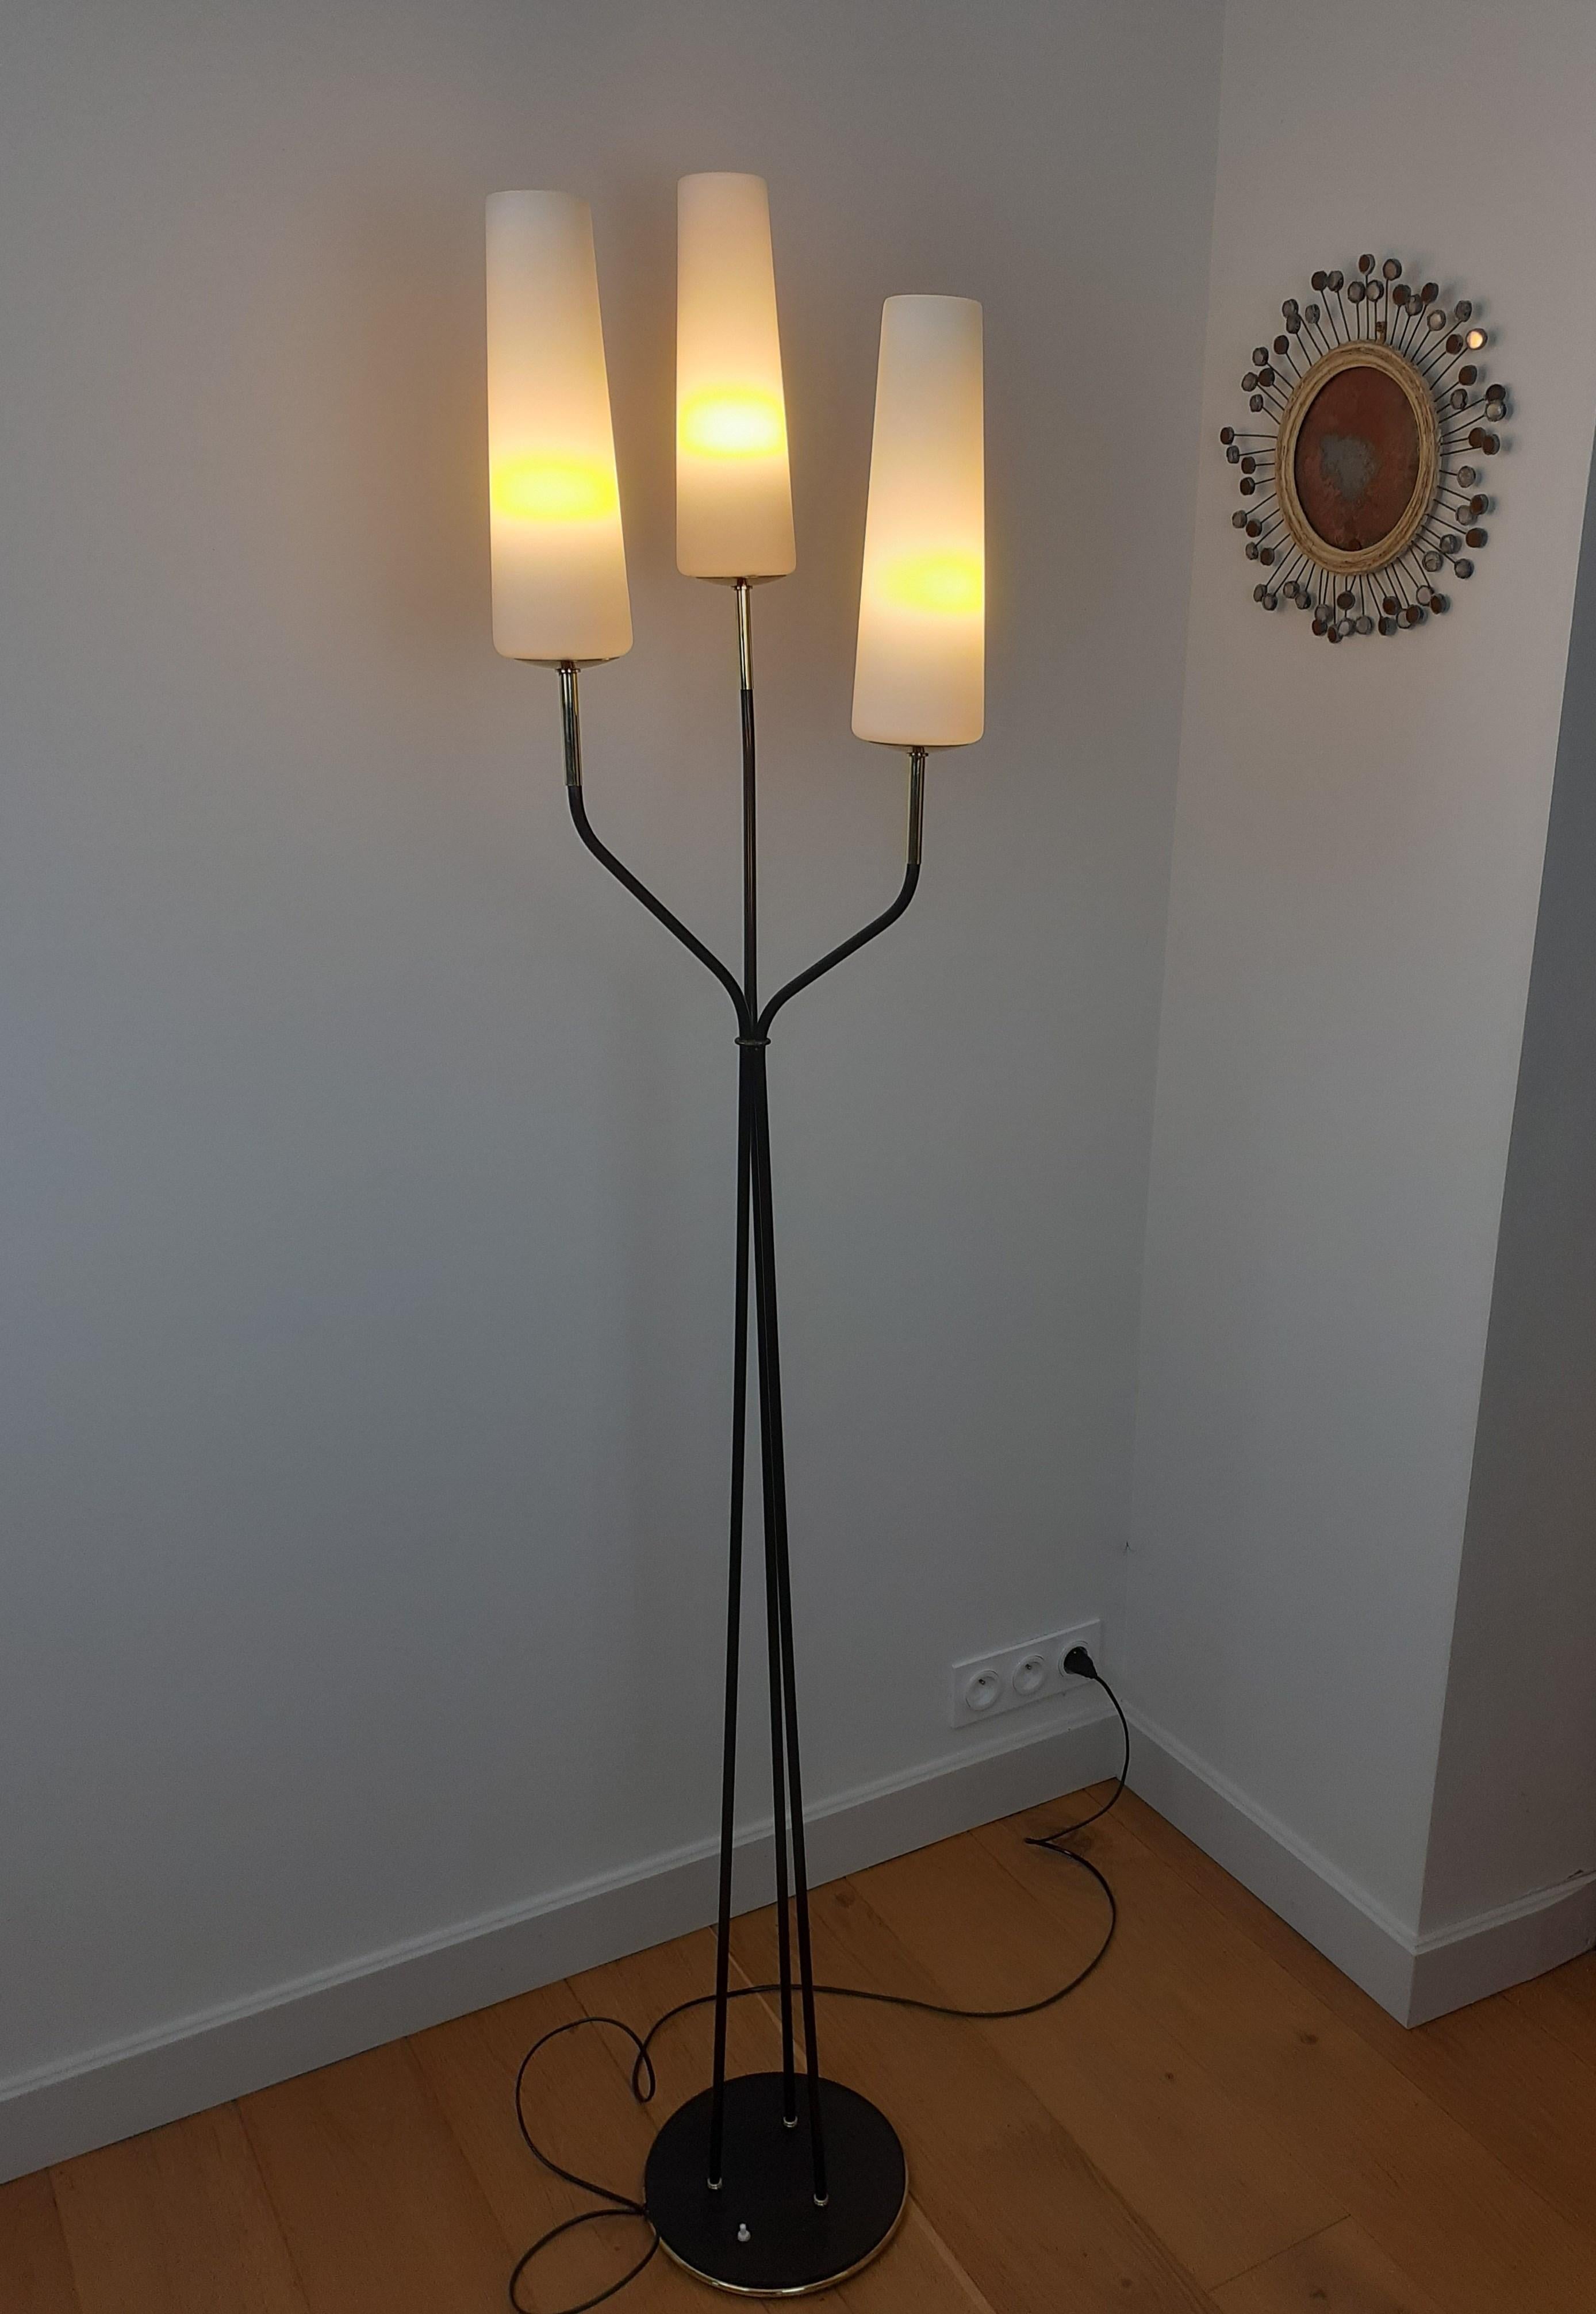 Floor lamp in metal and brass,
composed of a circular base in black lacquered cast iron, set with a brass ring, on which are arranged three arms of light in lacquered metal, finished with shades in white opaline glass.
French work from the Lunel